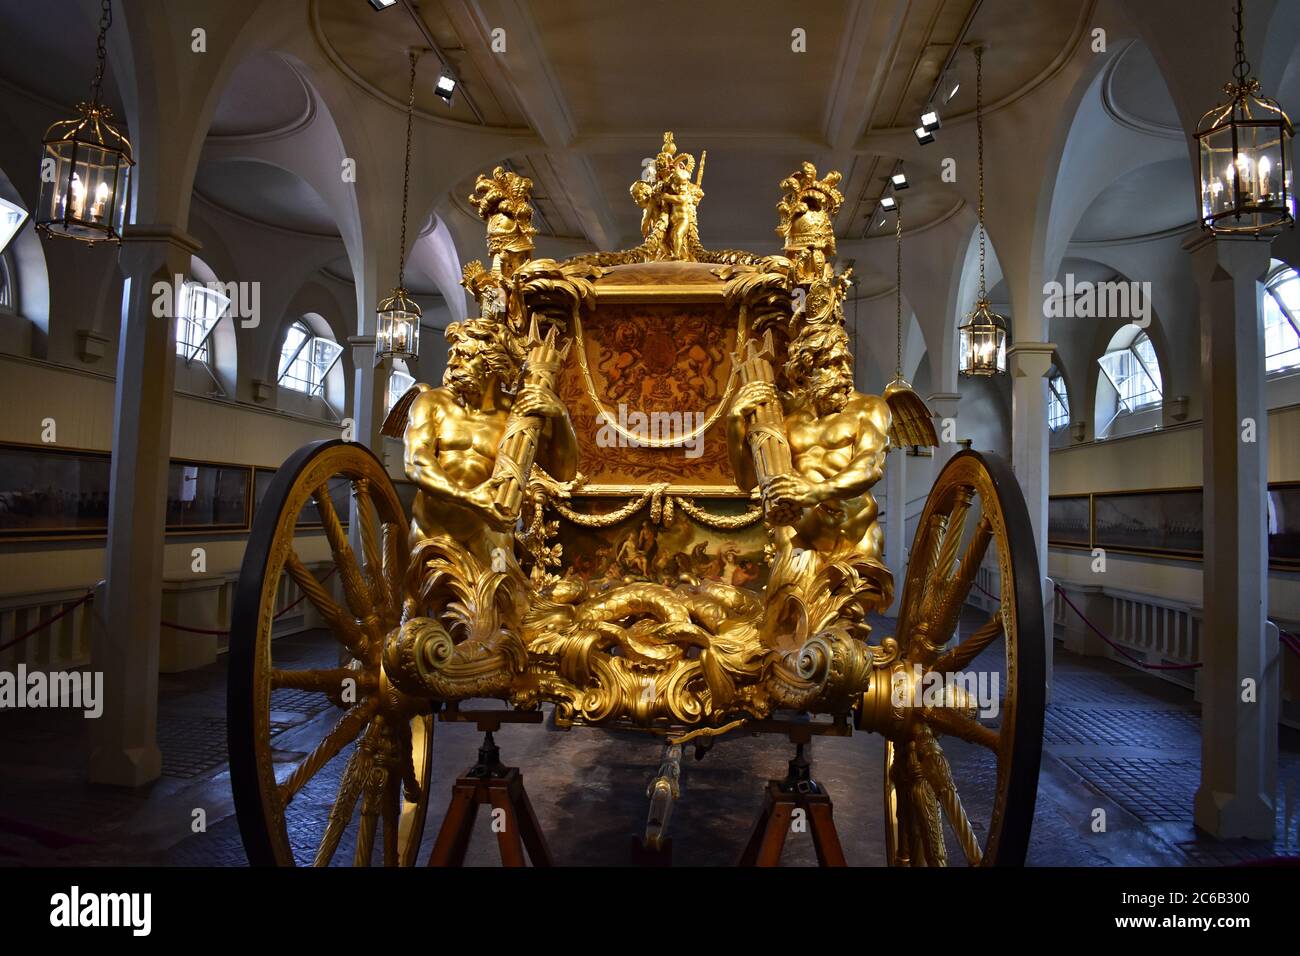 The back end of the Gold State Coach on display in the Royal Mews at  Buckingham Place. An ornate gilded enclosed eight horse drawn carriage  Stock Photo - Alamy